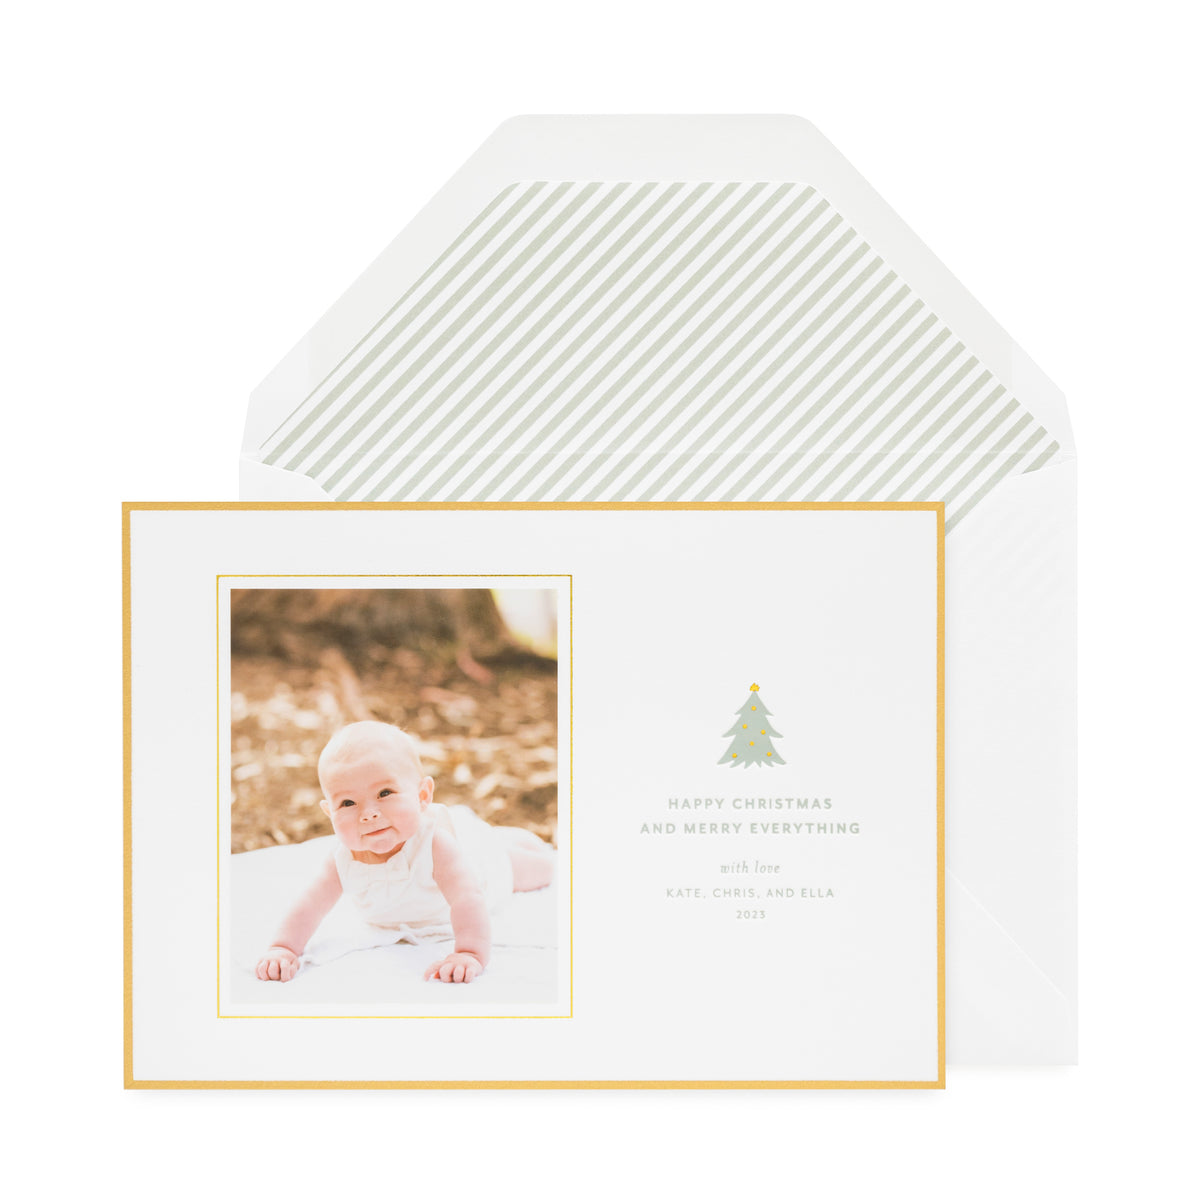 Gold bordered Christmas holiday card with green tree icon and green stripe envelope liner